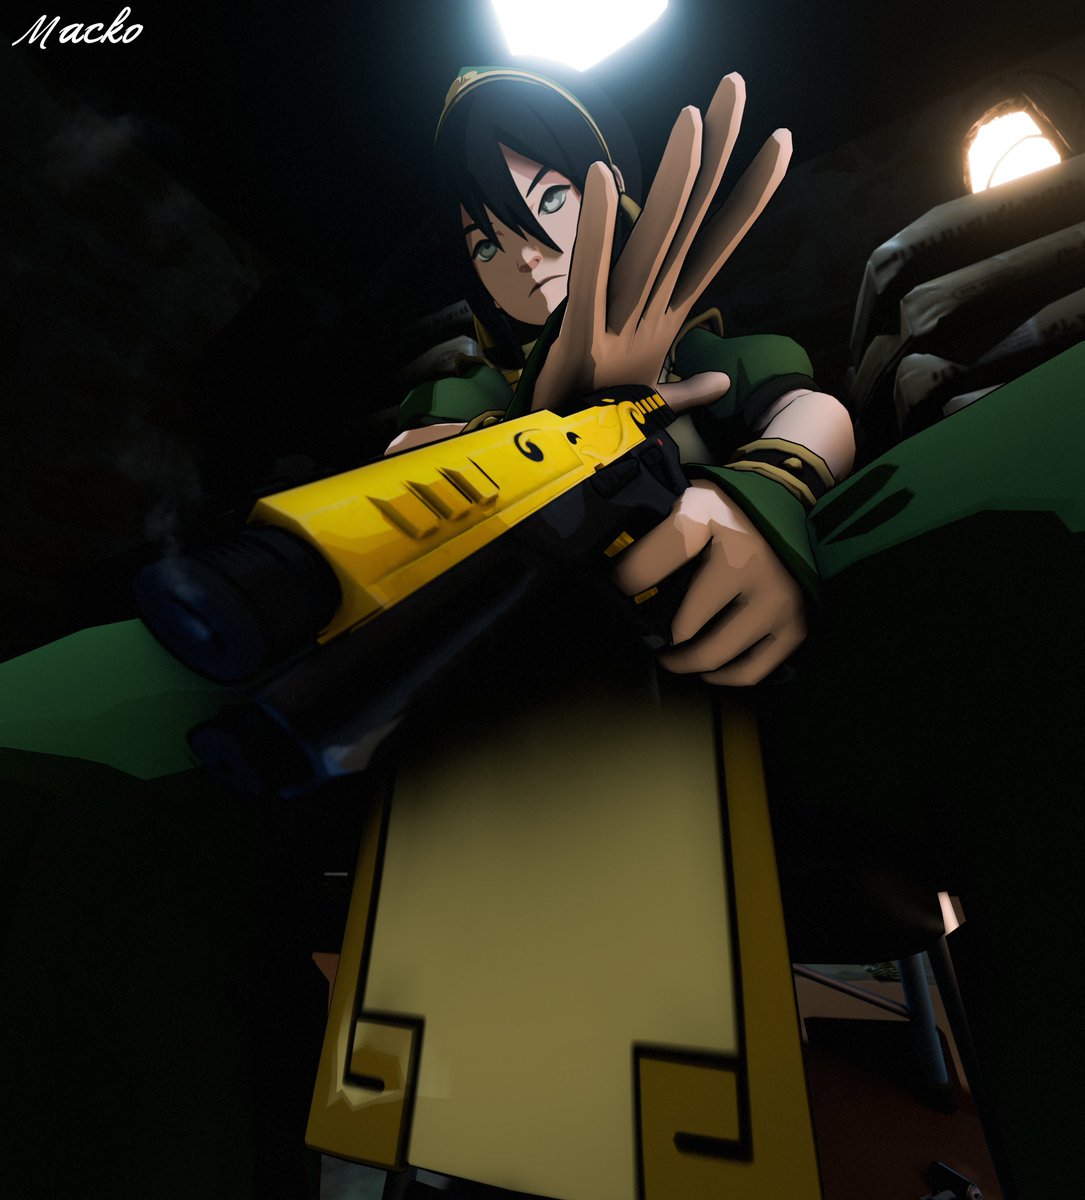 f-ck you *metal bends a bullet into your skull* #FortniteArt #AvatarTheLastAirbender #TophBeifong